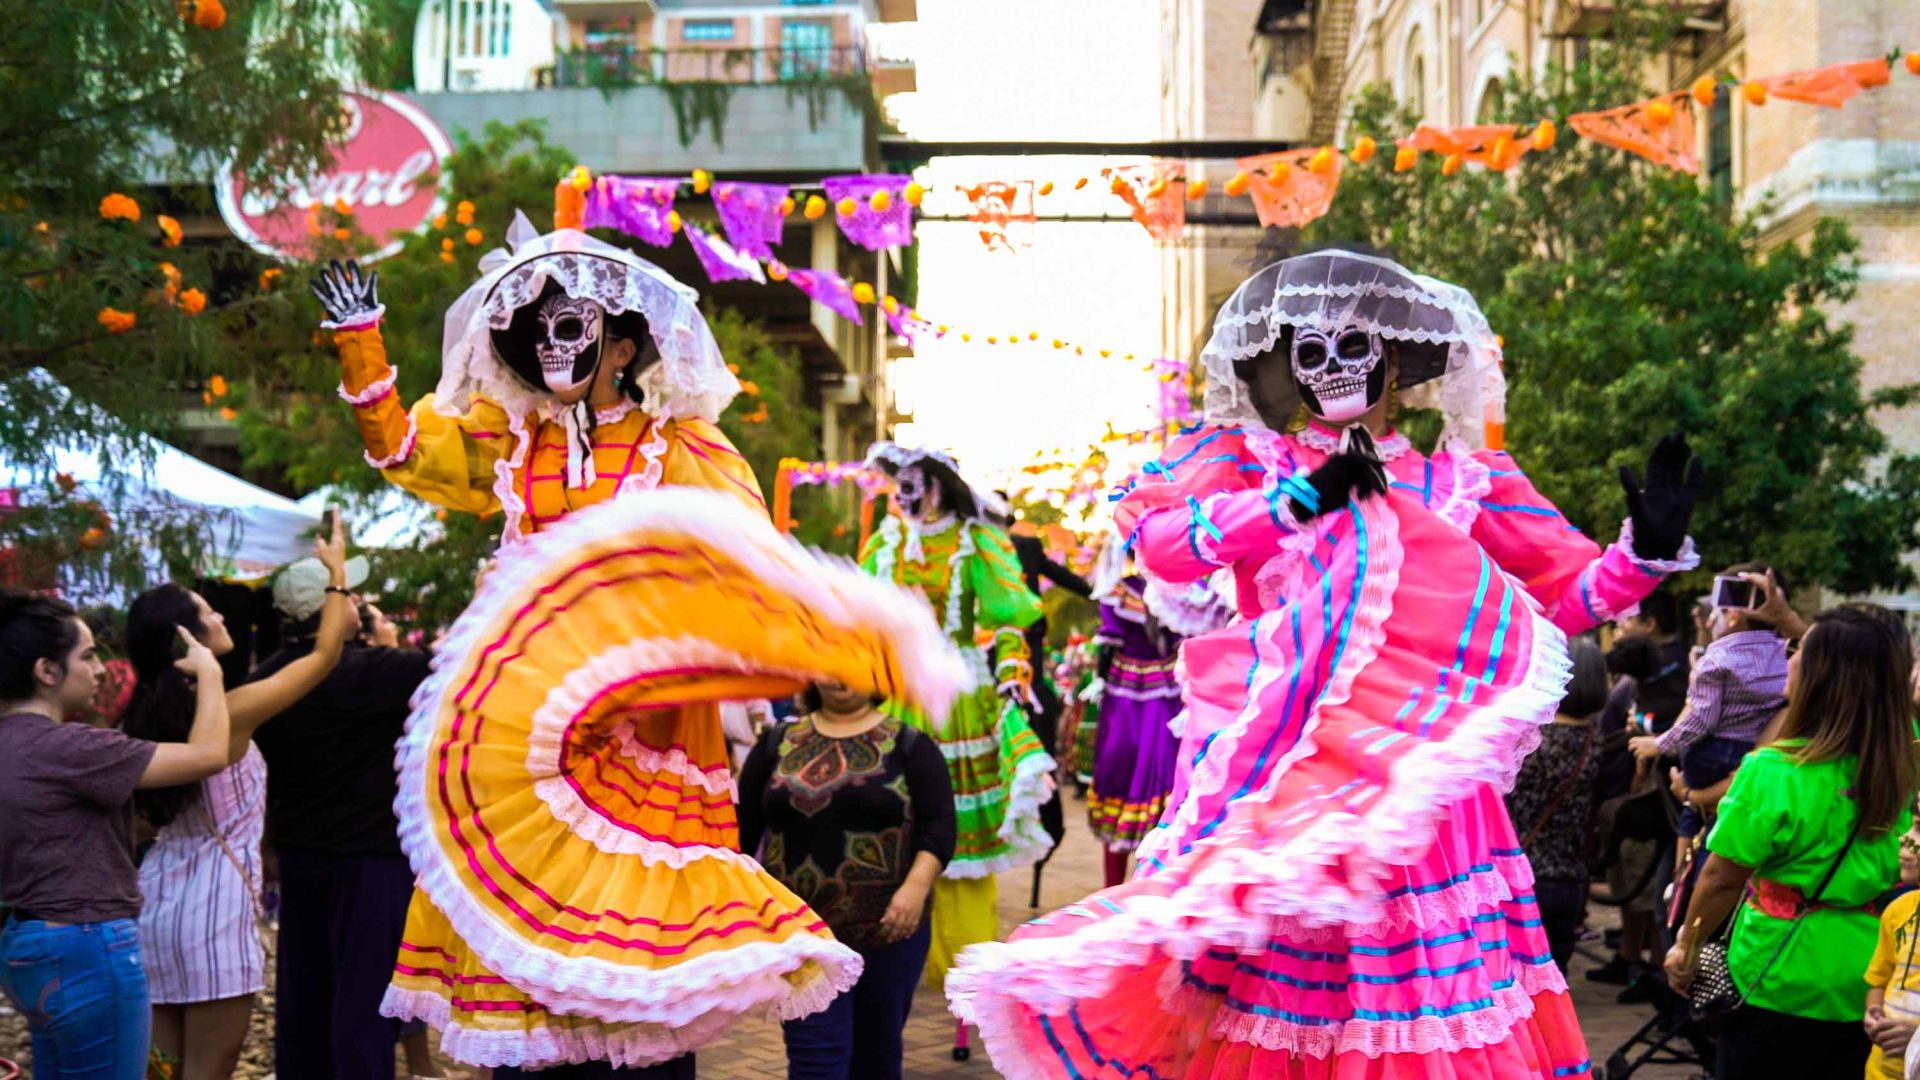 We’re all scared of dying. Día de Los Muertos teaches how to embrace it